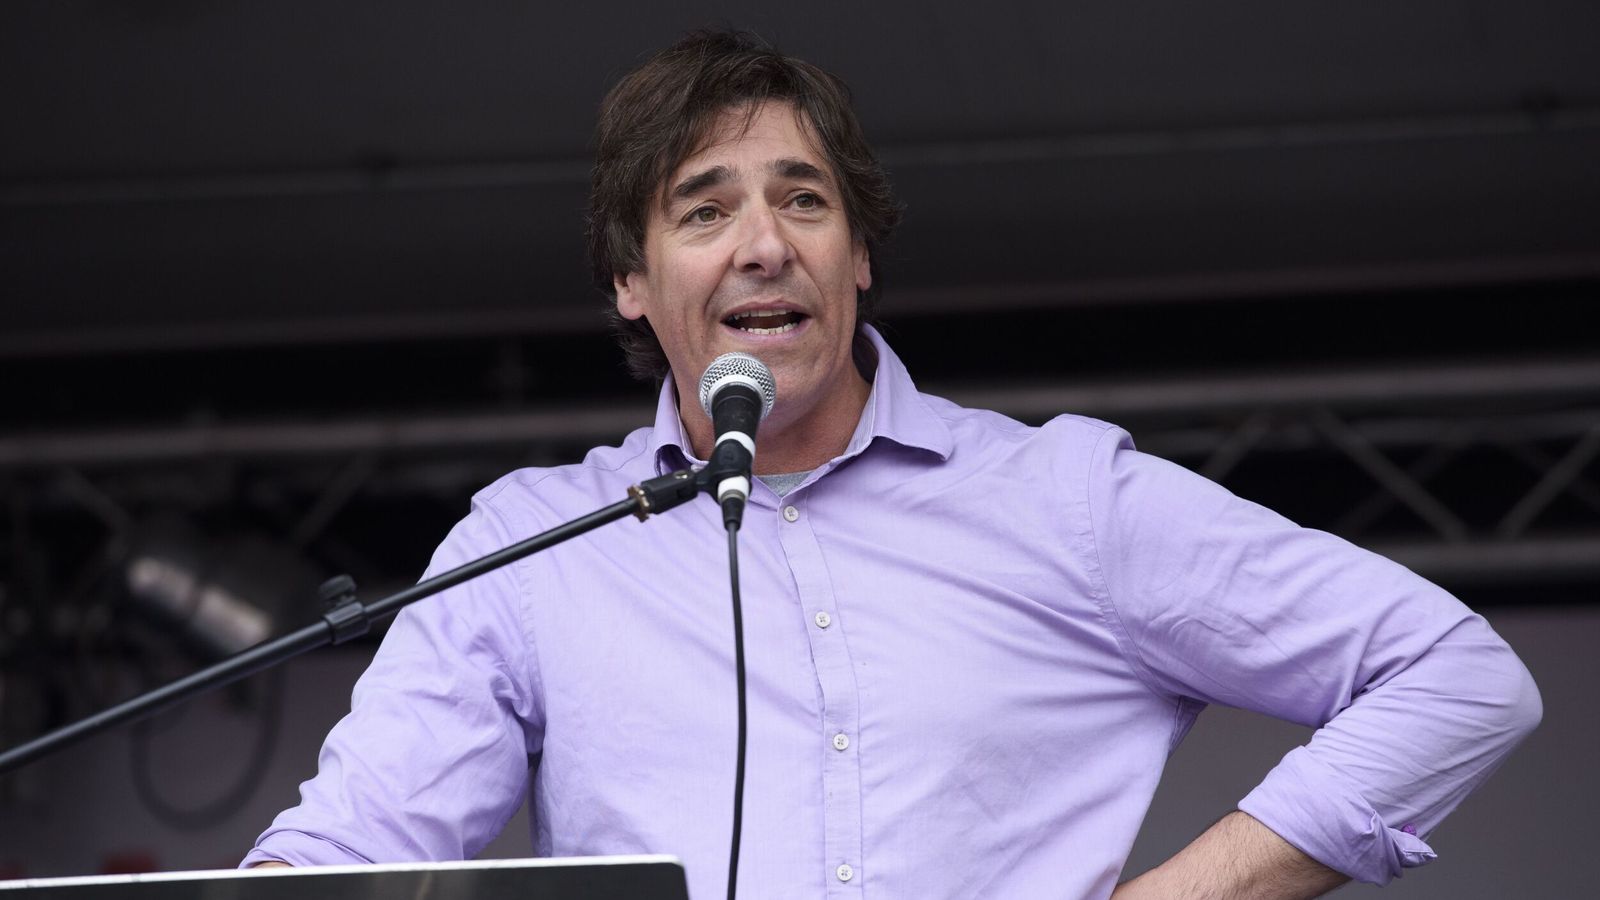 Comedian Mark Steel confirms illness and describes moment of cancer diagnosis